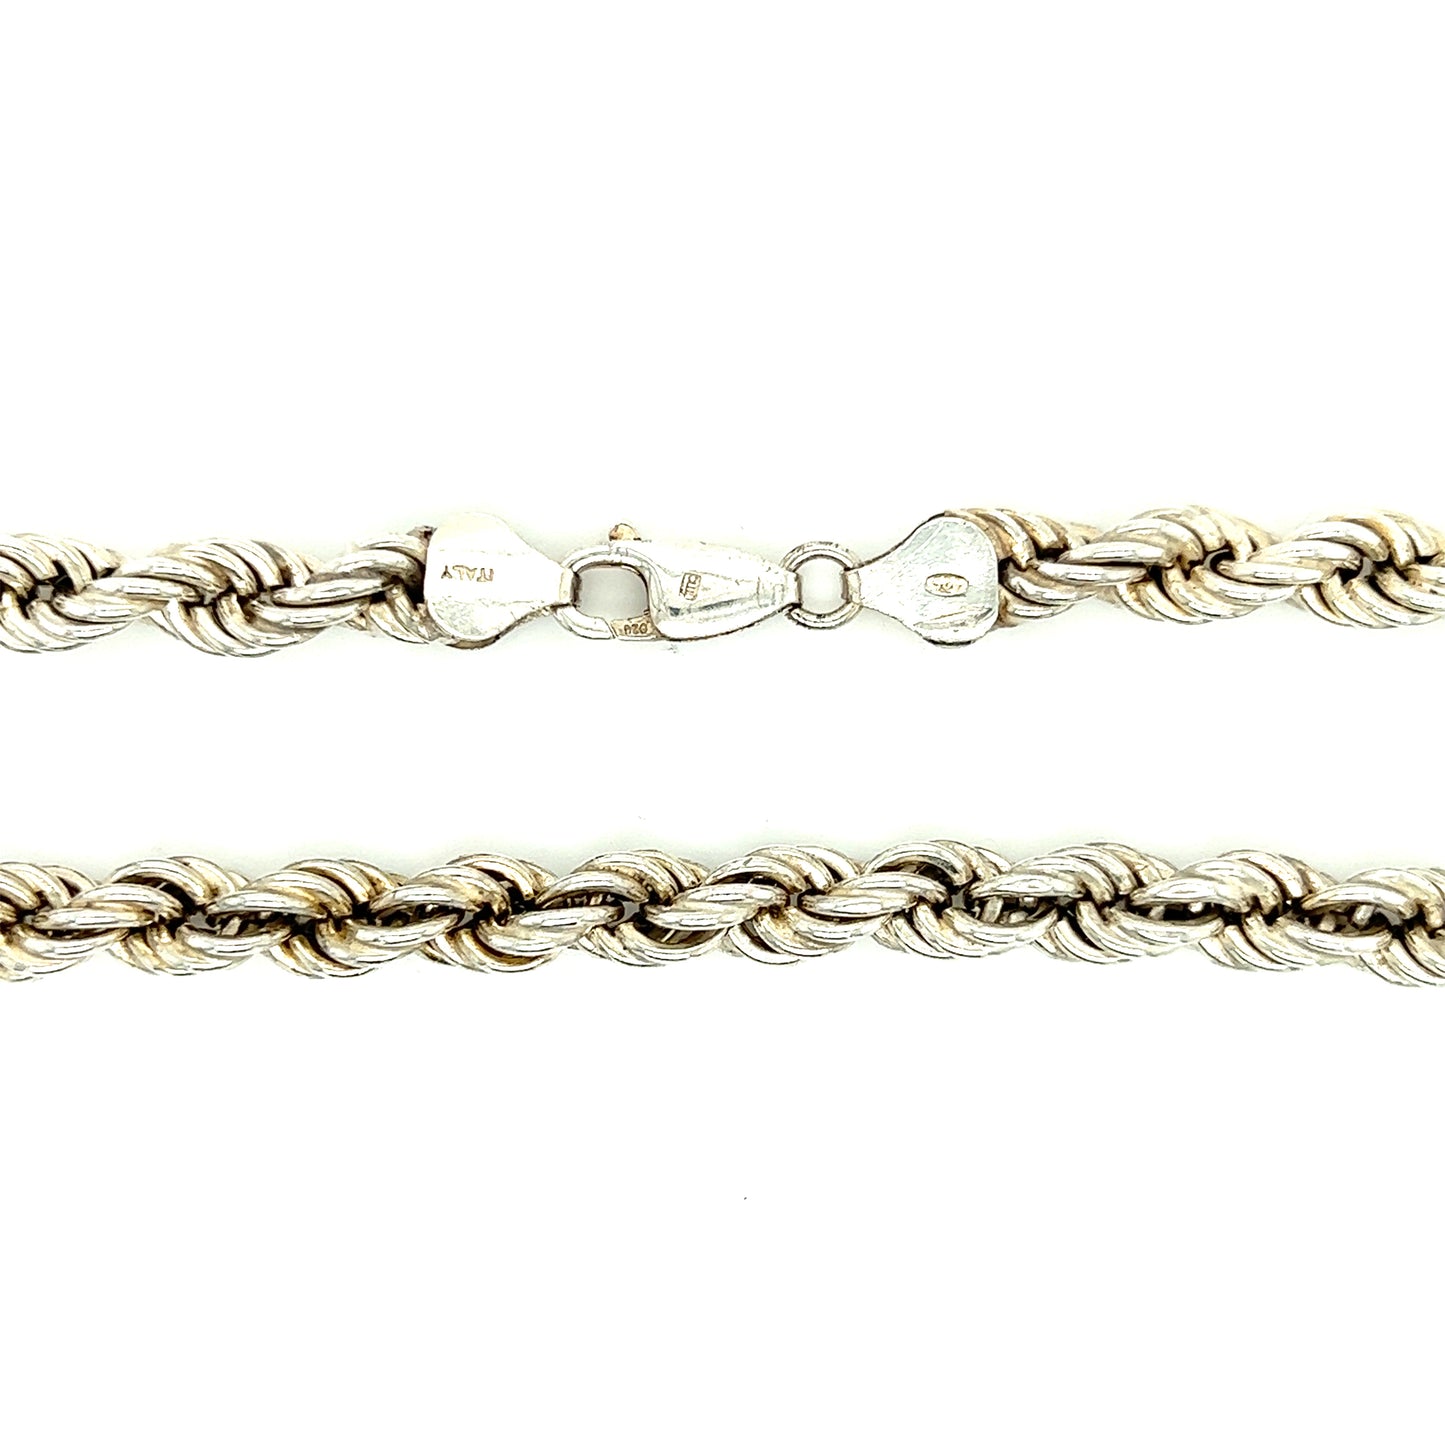 Rope Chain 6mm with 20in Length in Sterling Silver Chain and Clasp View